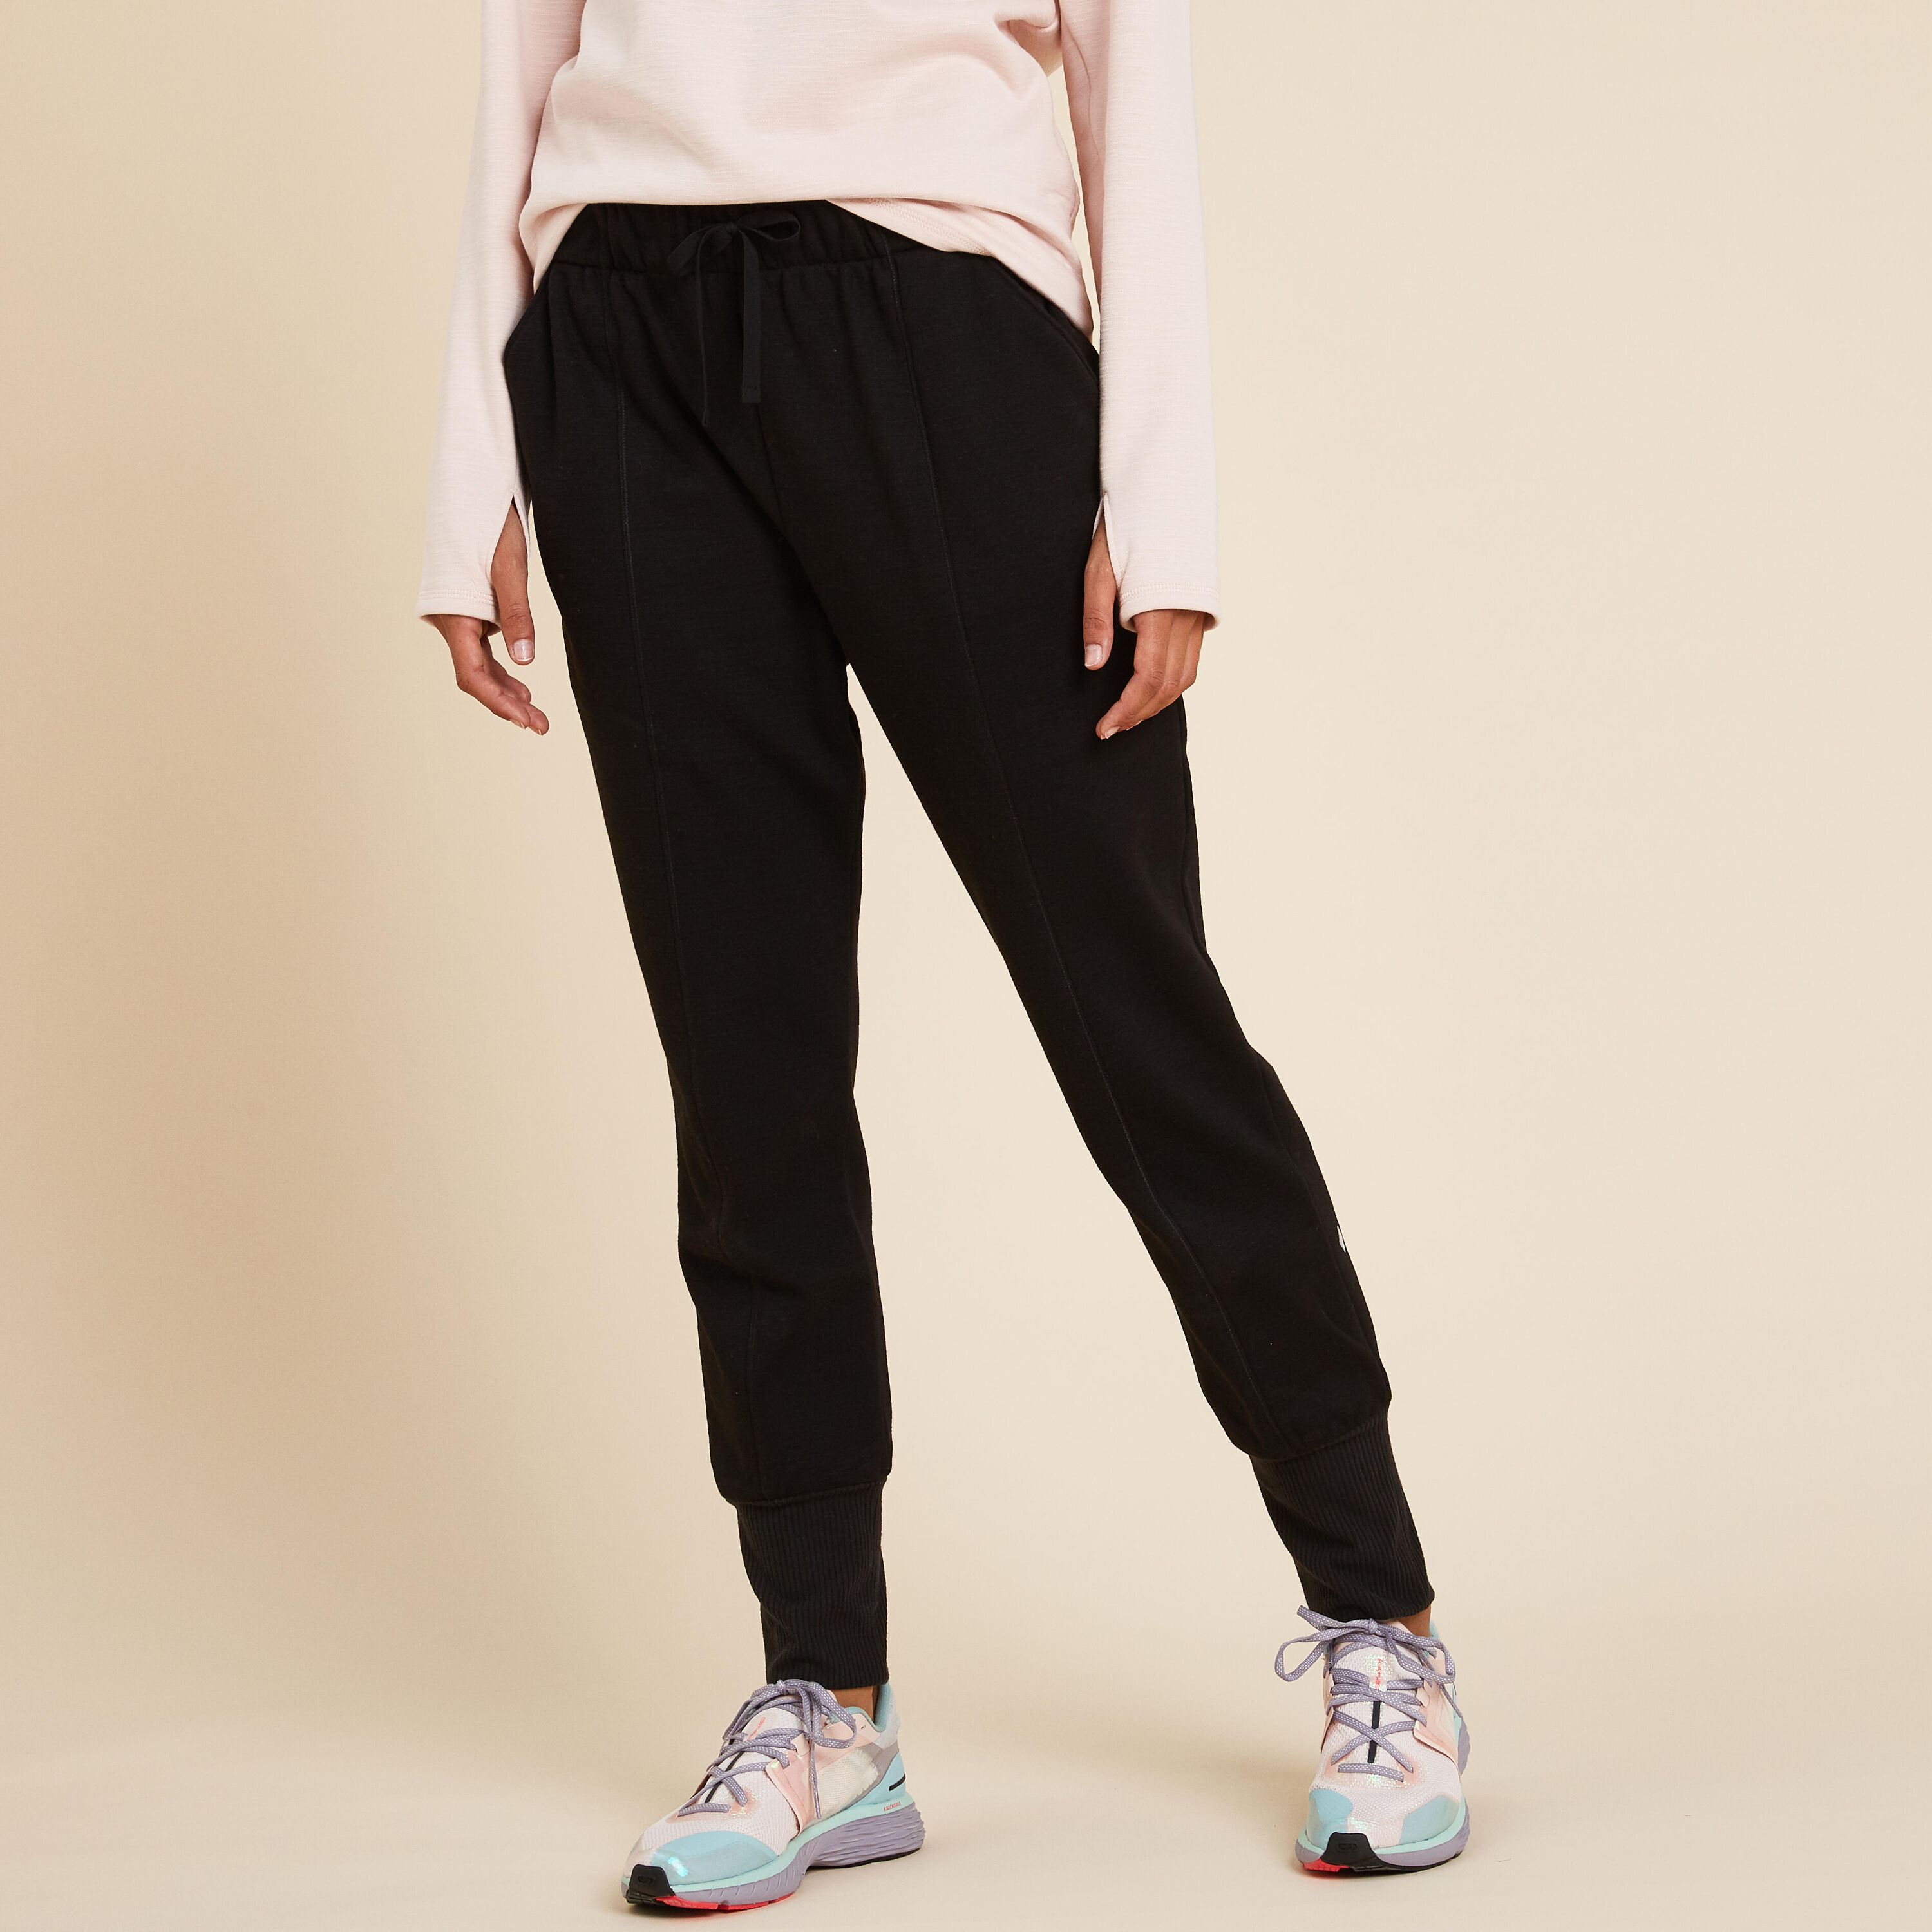 Women's Joggers & Tracksuits Bottoms